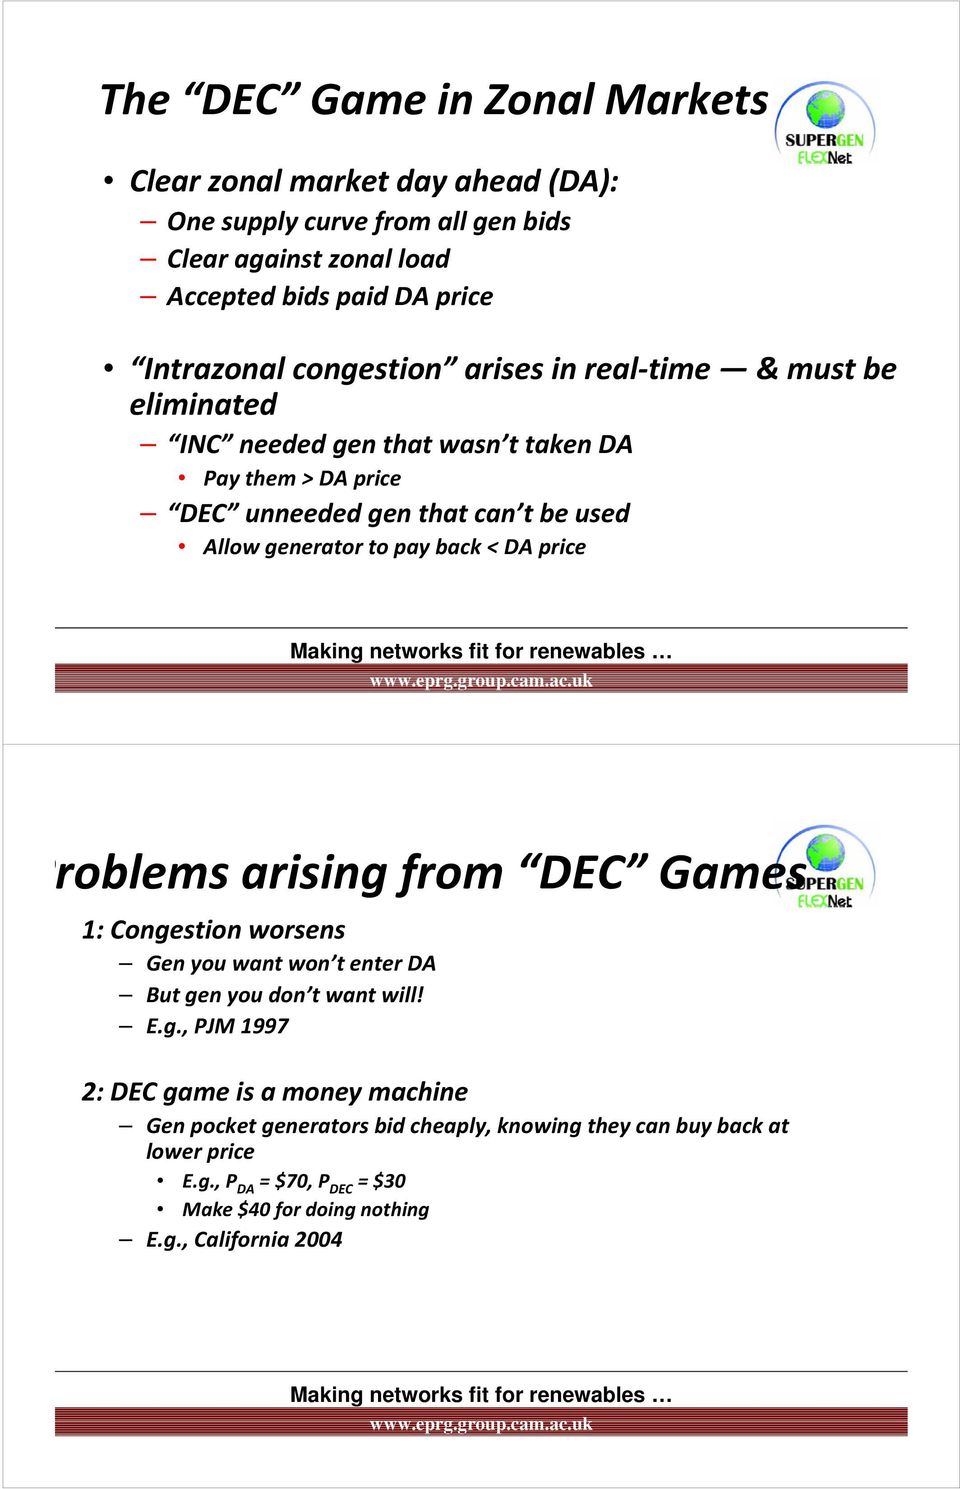 pay back < DA price Problems arising from DEC Games 1: Congestion worsens Gen you want won t enter DA But gen you don t want will! E.g., PJM 1997 2: DEC game is a money machine Gen pocket generators bid cheaply, knowing they can buy back at lower price E.